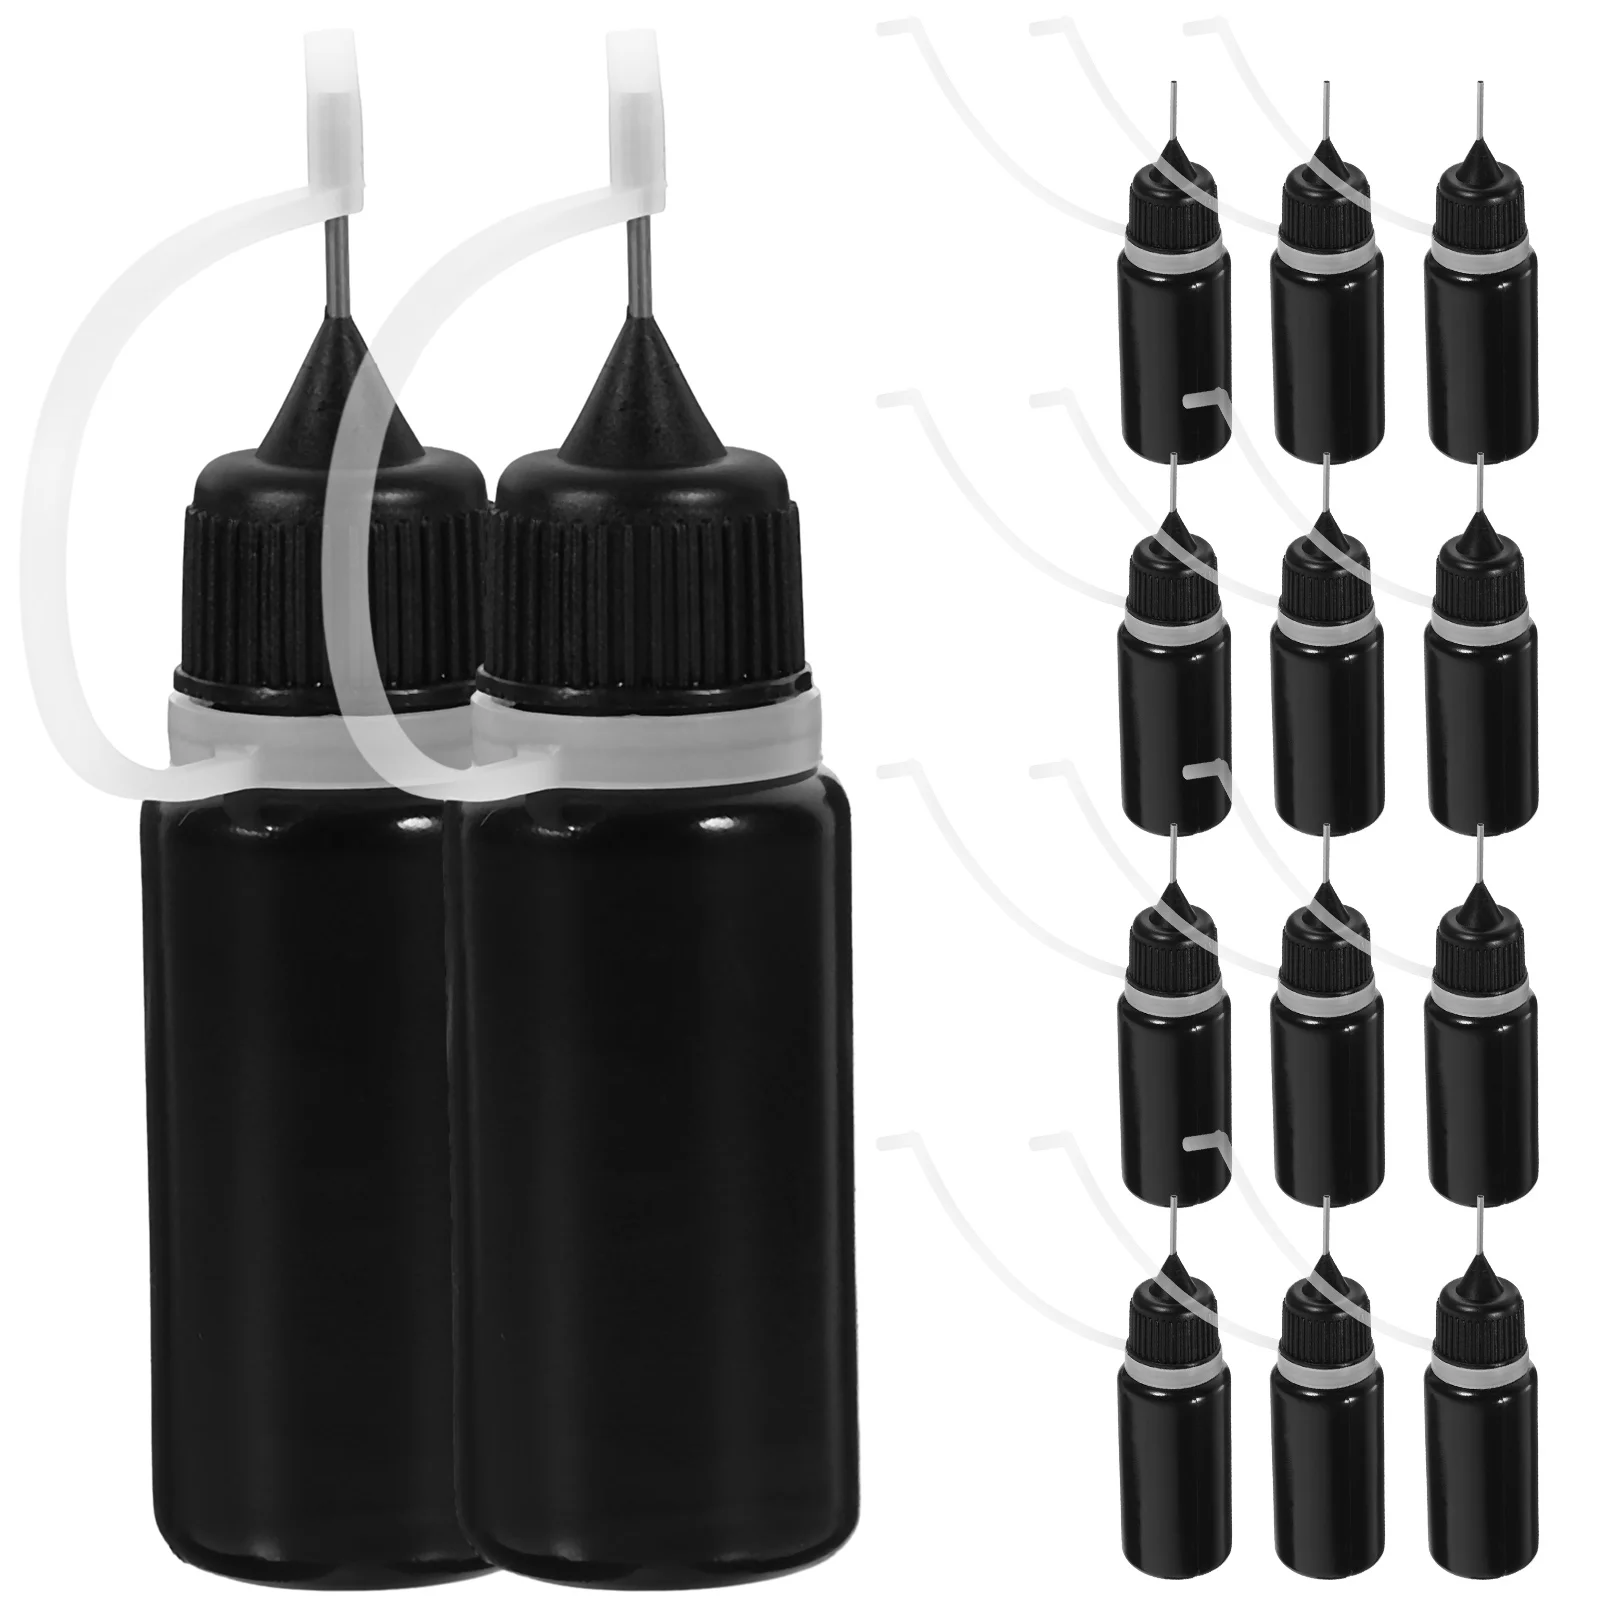 20 Pcs Bottled Squeeze Bottles Glue with Fine Tip for Liquids Needle Small Stainless Steel Precision Applicator Dispenser foundry glue ab metal repair agent adhesive cast iron aluminum stainless steel oil tank radiator welding